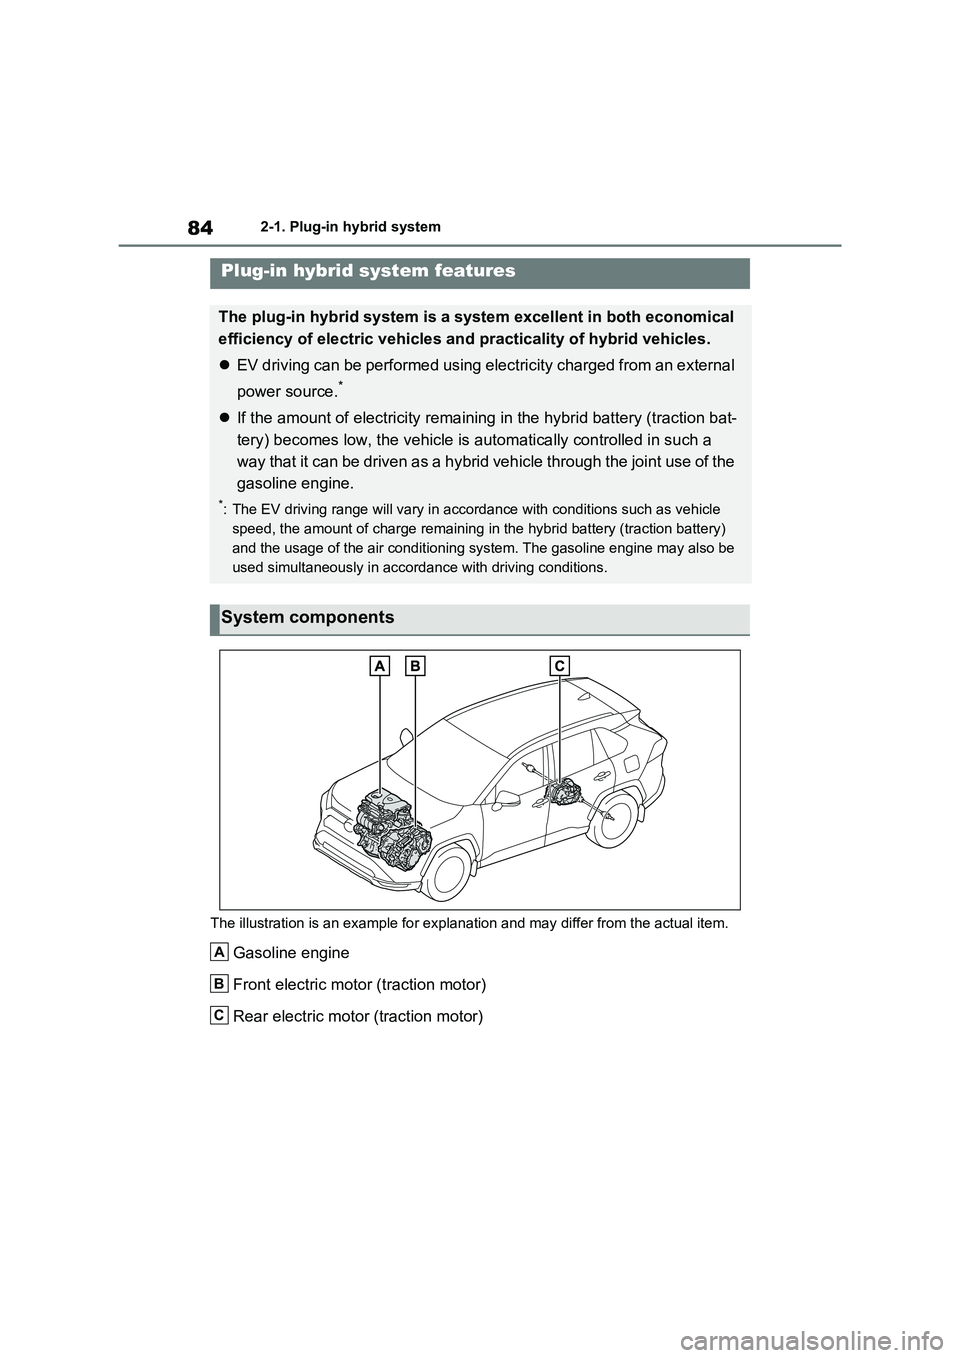 TOYOTA RAV4 PLUG-IN HYBRID 2021  Owners Manual 842-1. Plug-in hybrid system
2-1.Plug-in hybrid system
The illustration is an example for explanation and may differ from the actual item.
Gasoline engine 
Front electric motor (traction motor)
Rear e